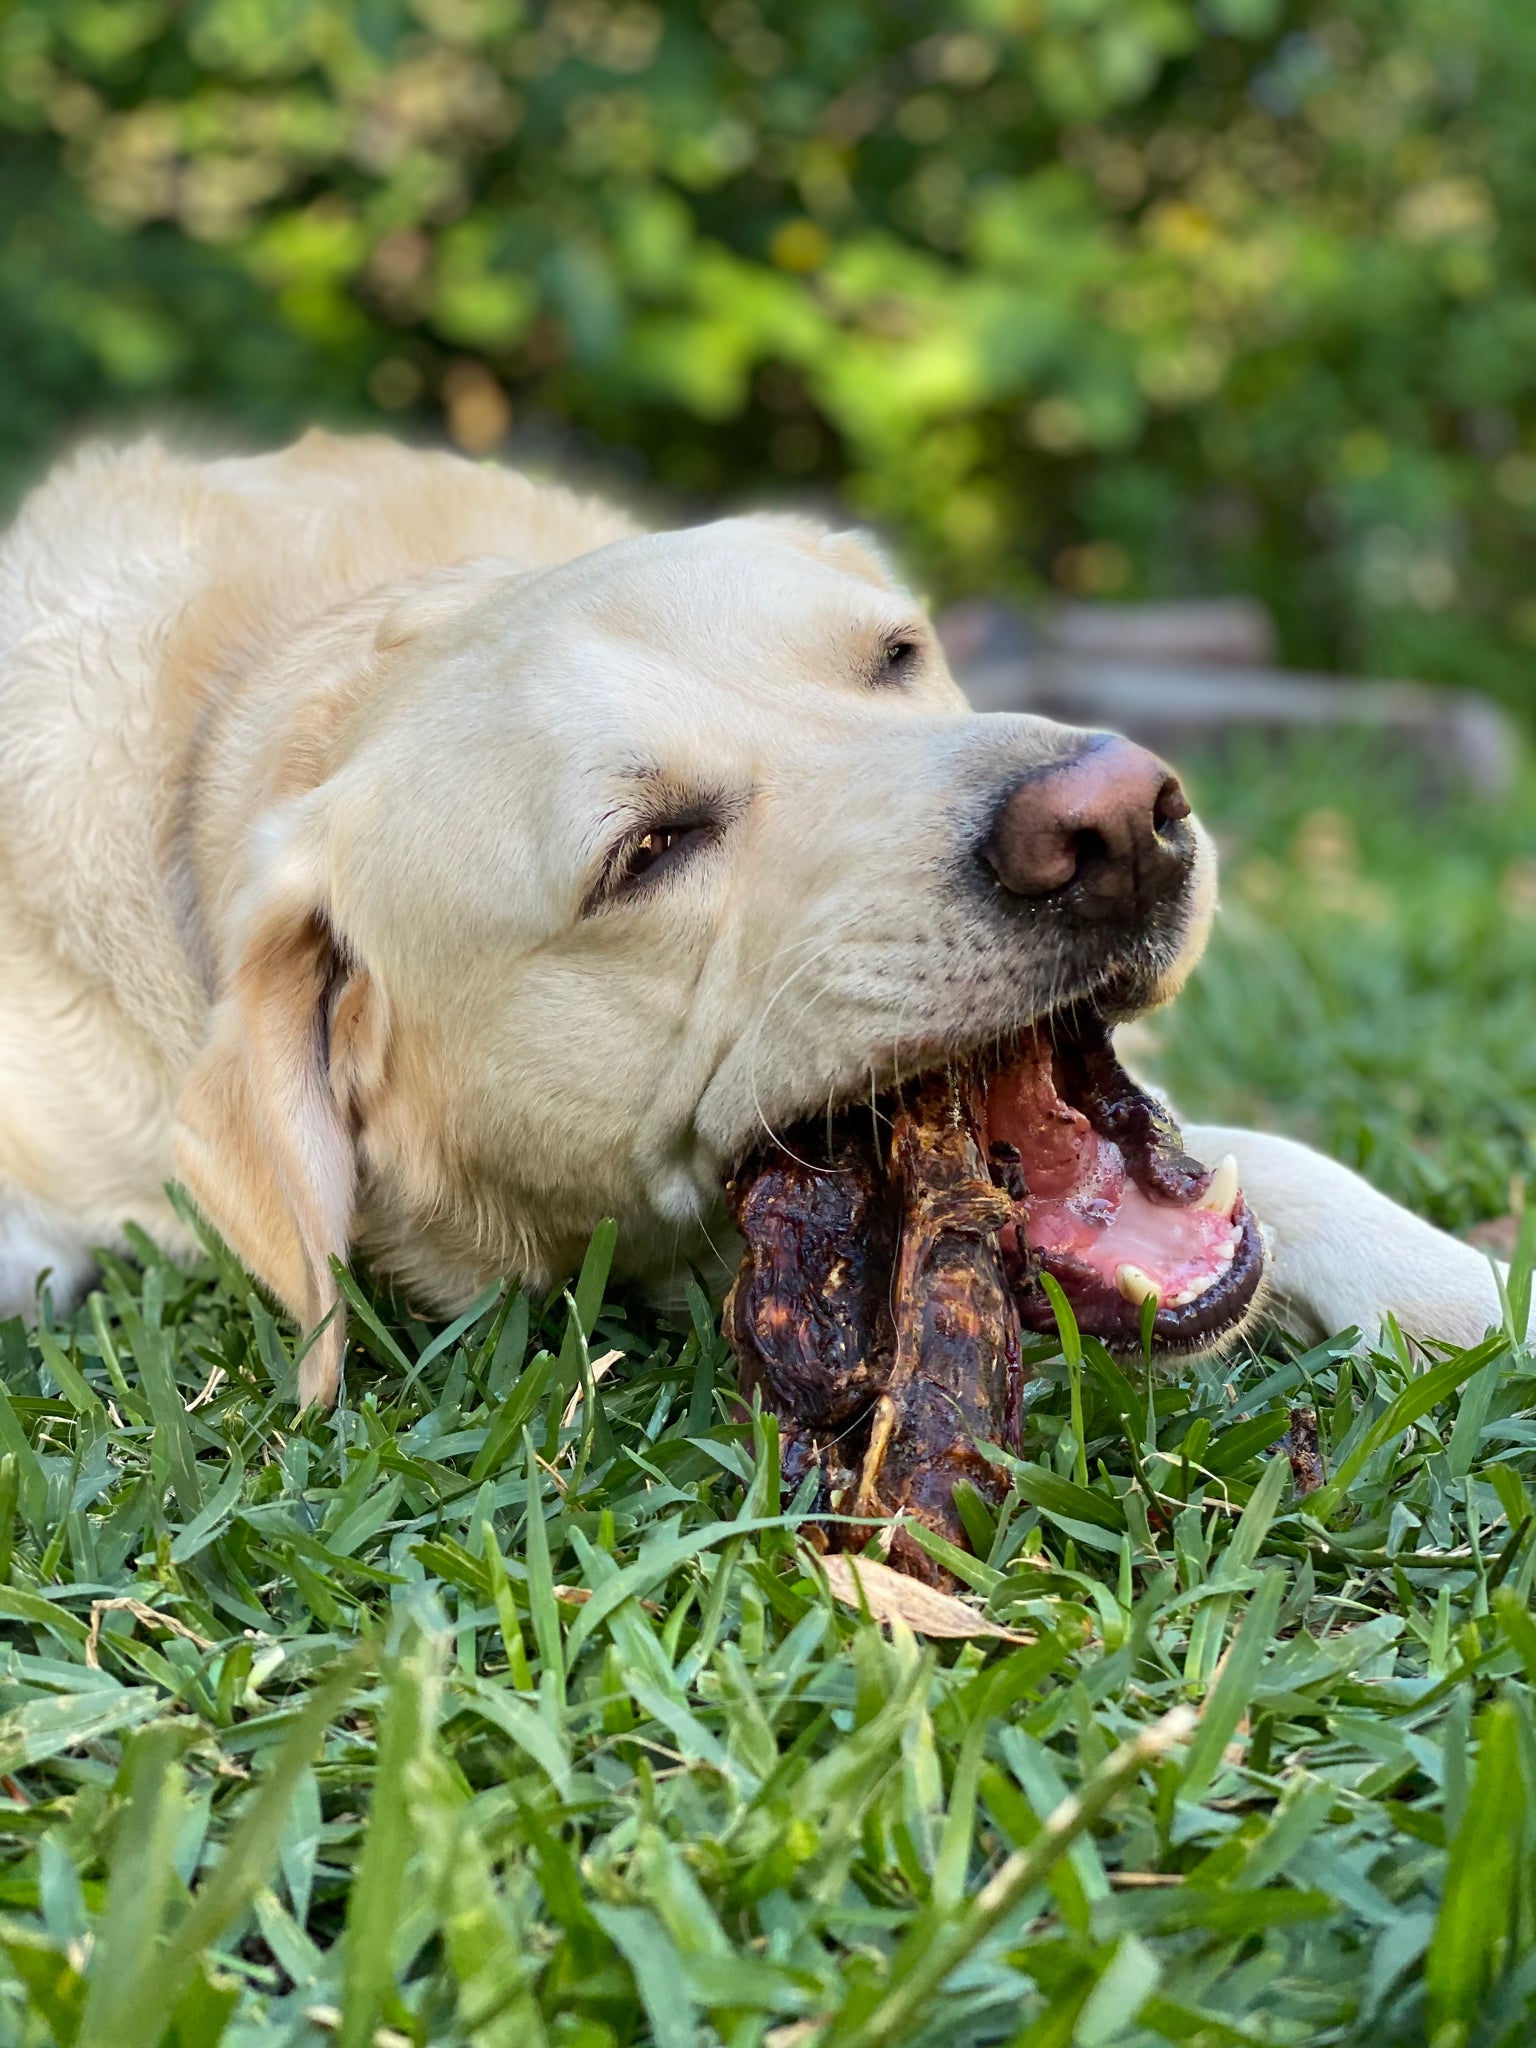 can dogs eat beef tail